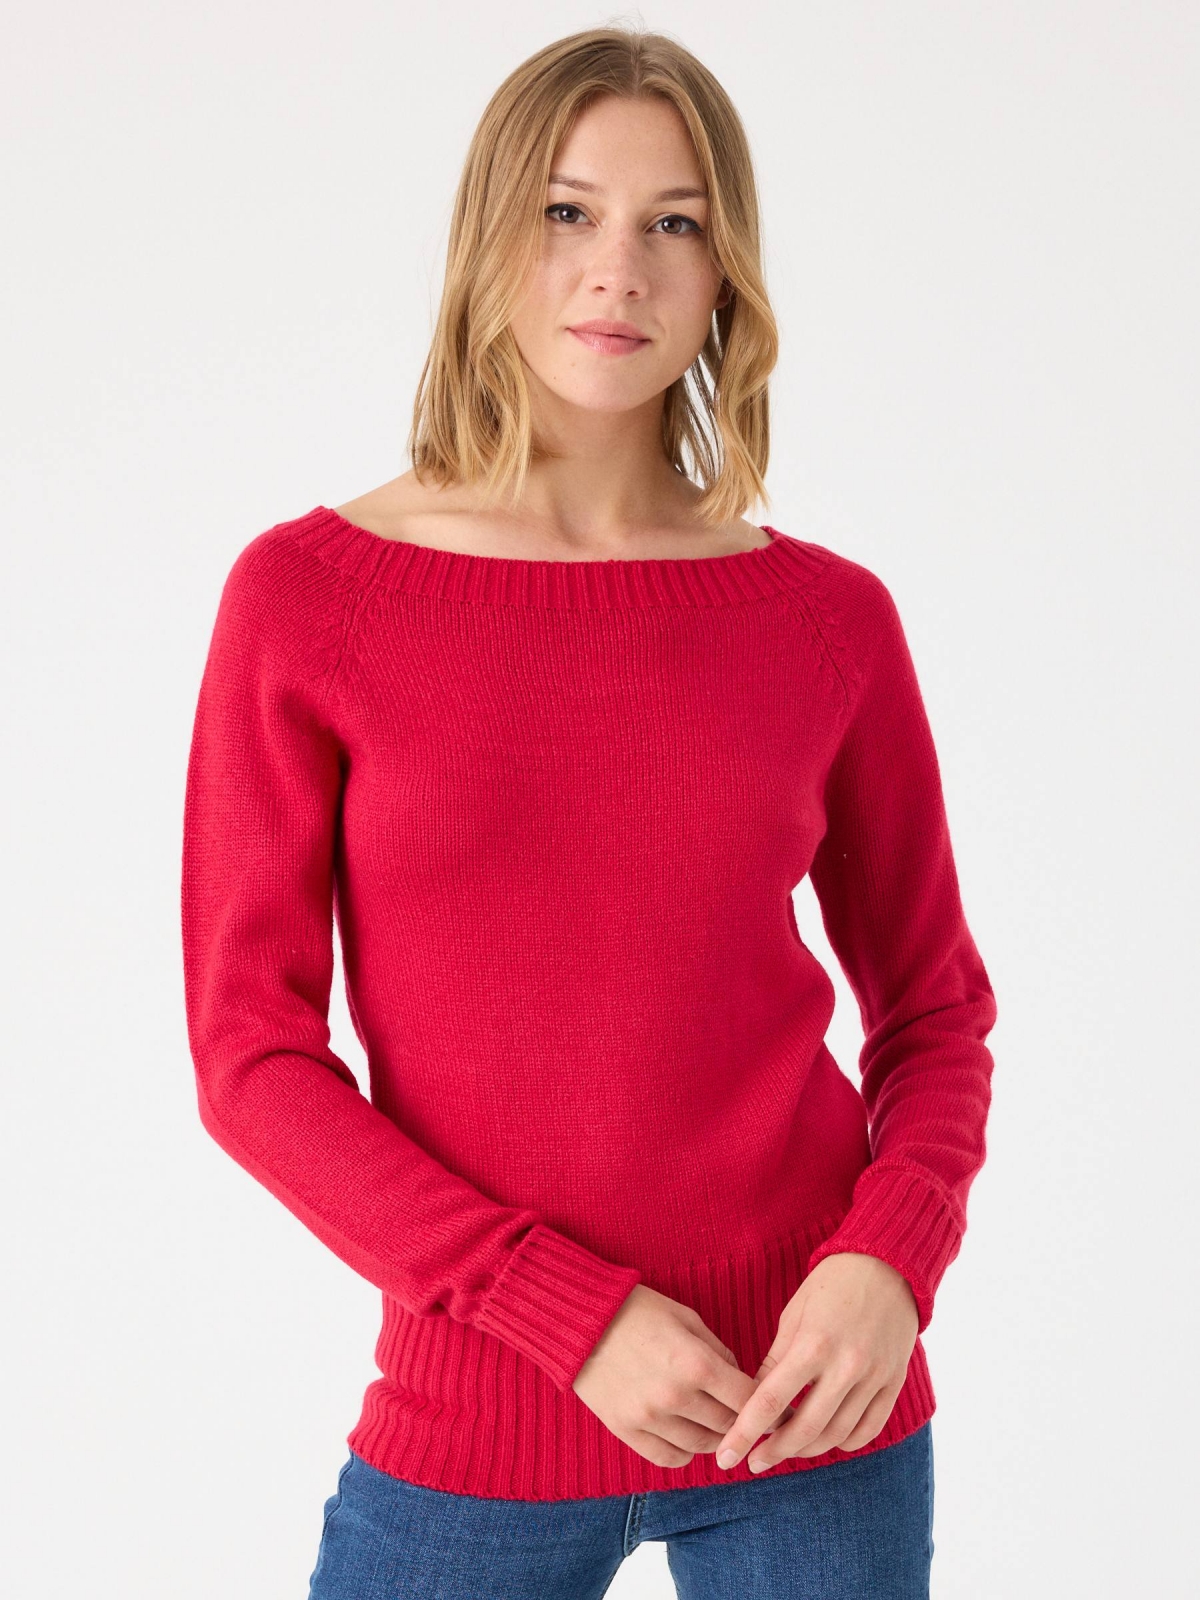 Marbled boat sweater red middle front view